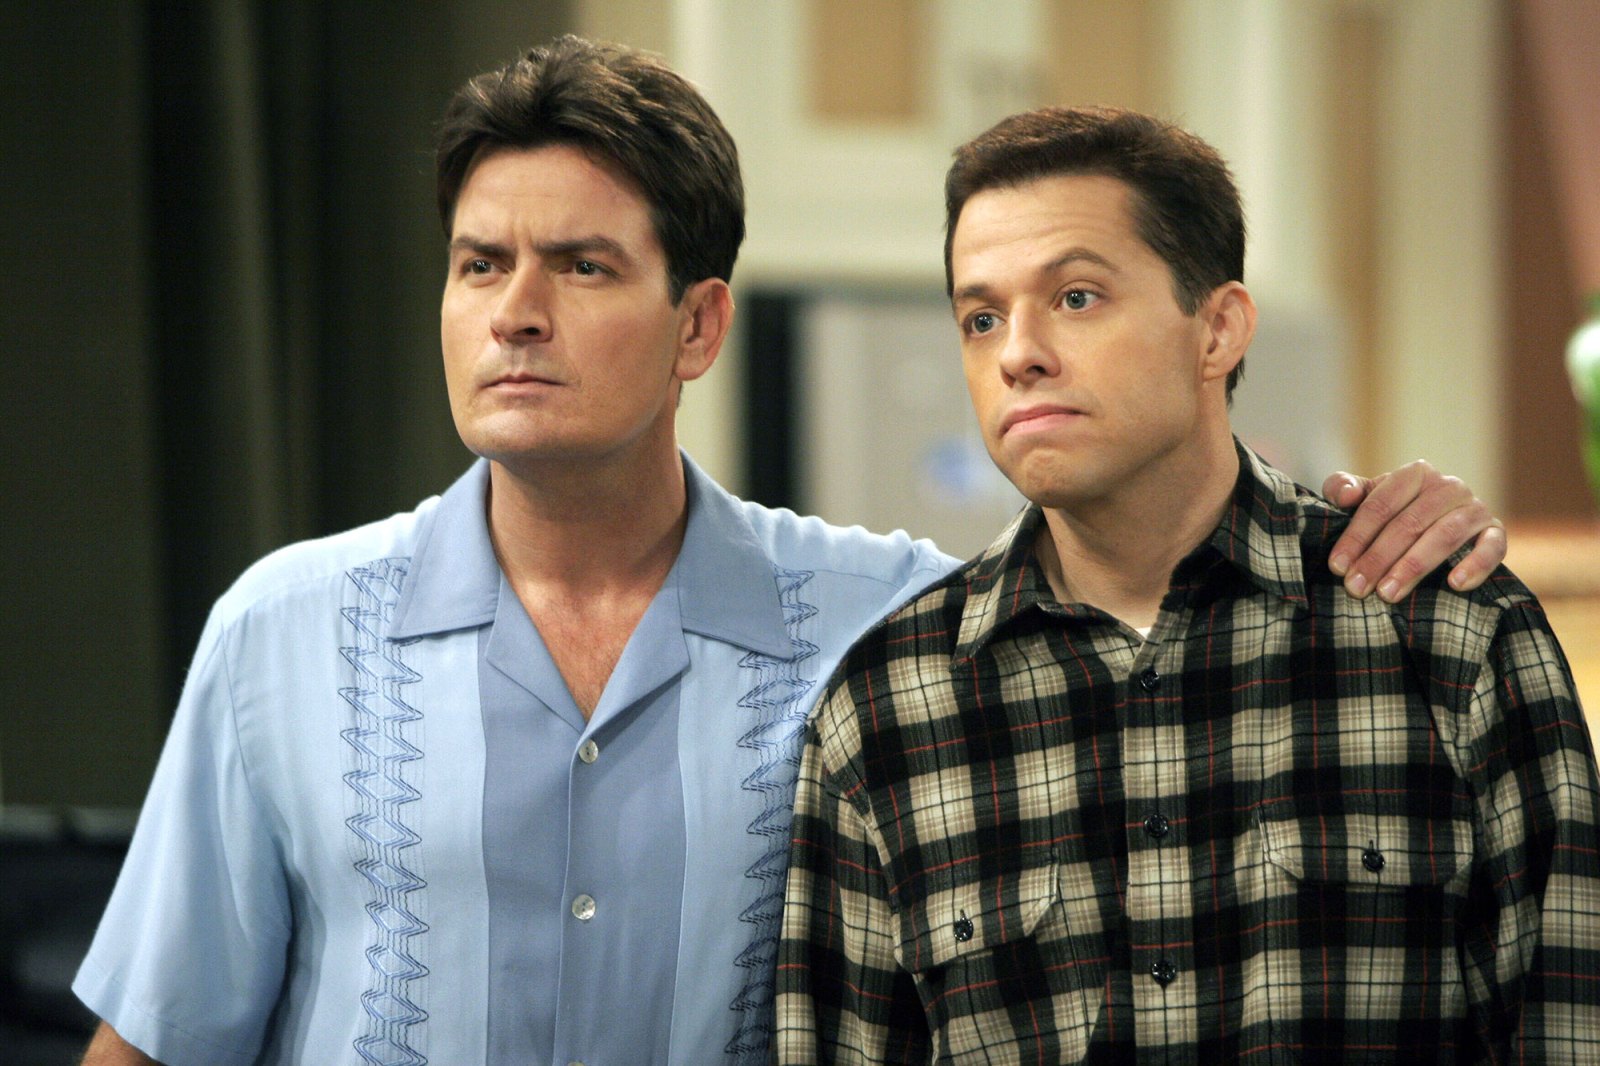 Charlie Sheen and Jon Cryer's Ups and Downs Through the Years